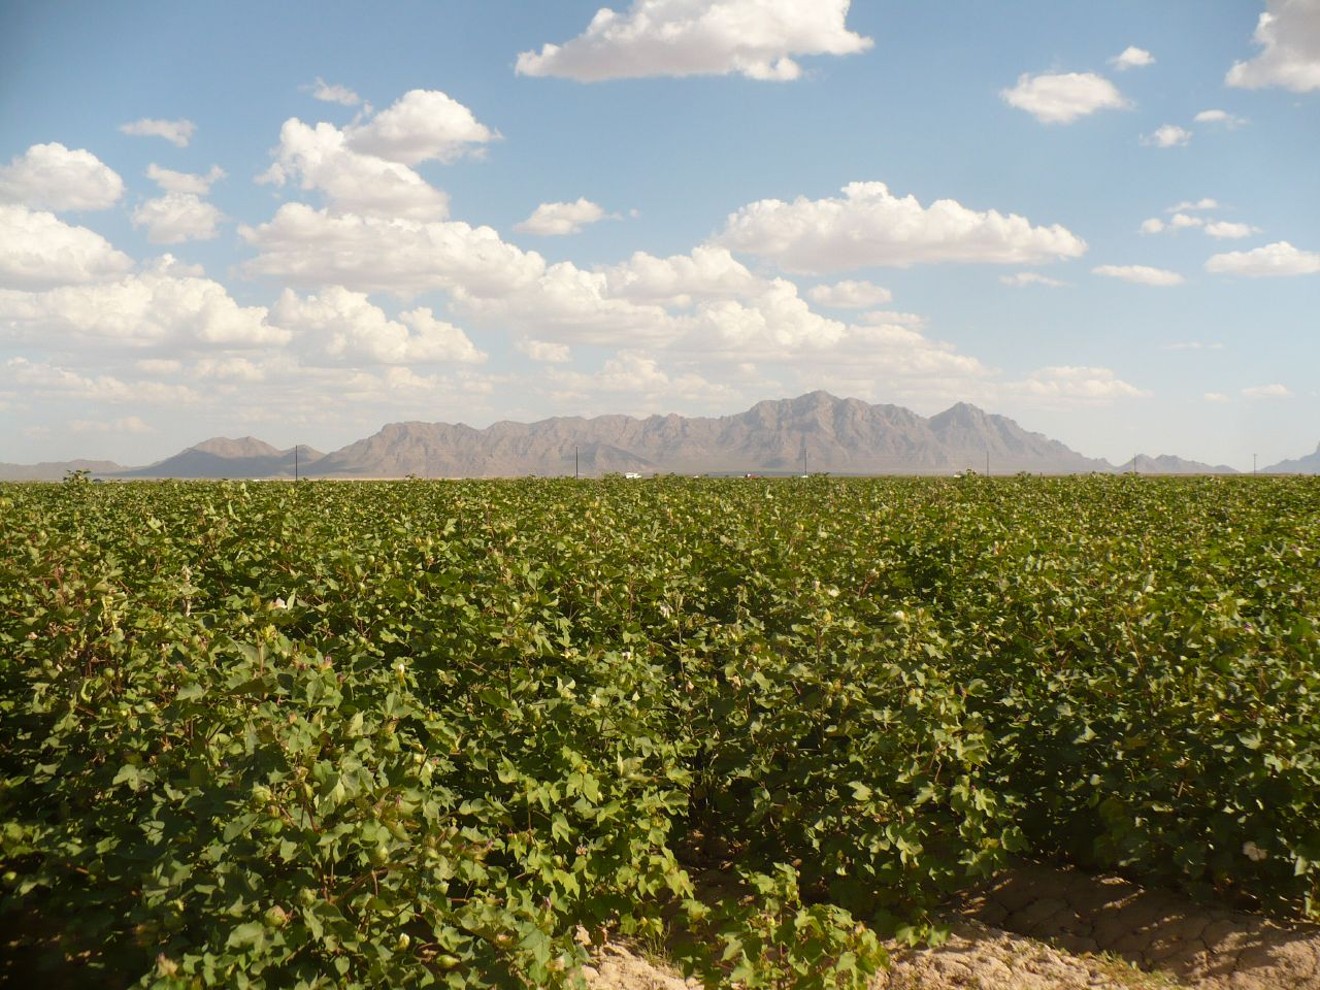 Fields of cotton in Pinal County, Arizona.